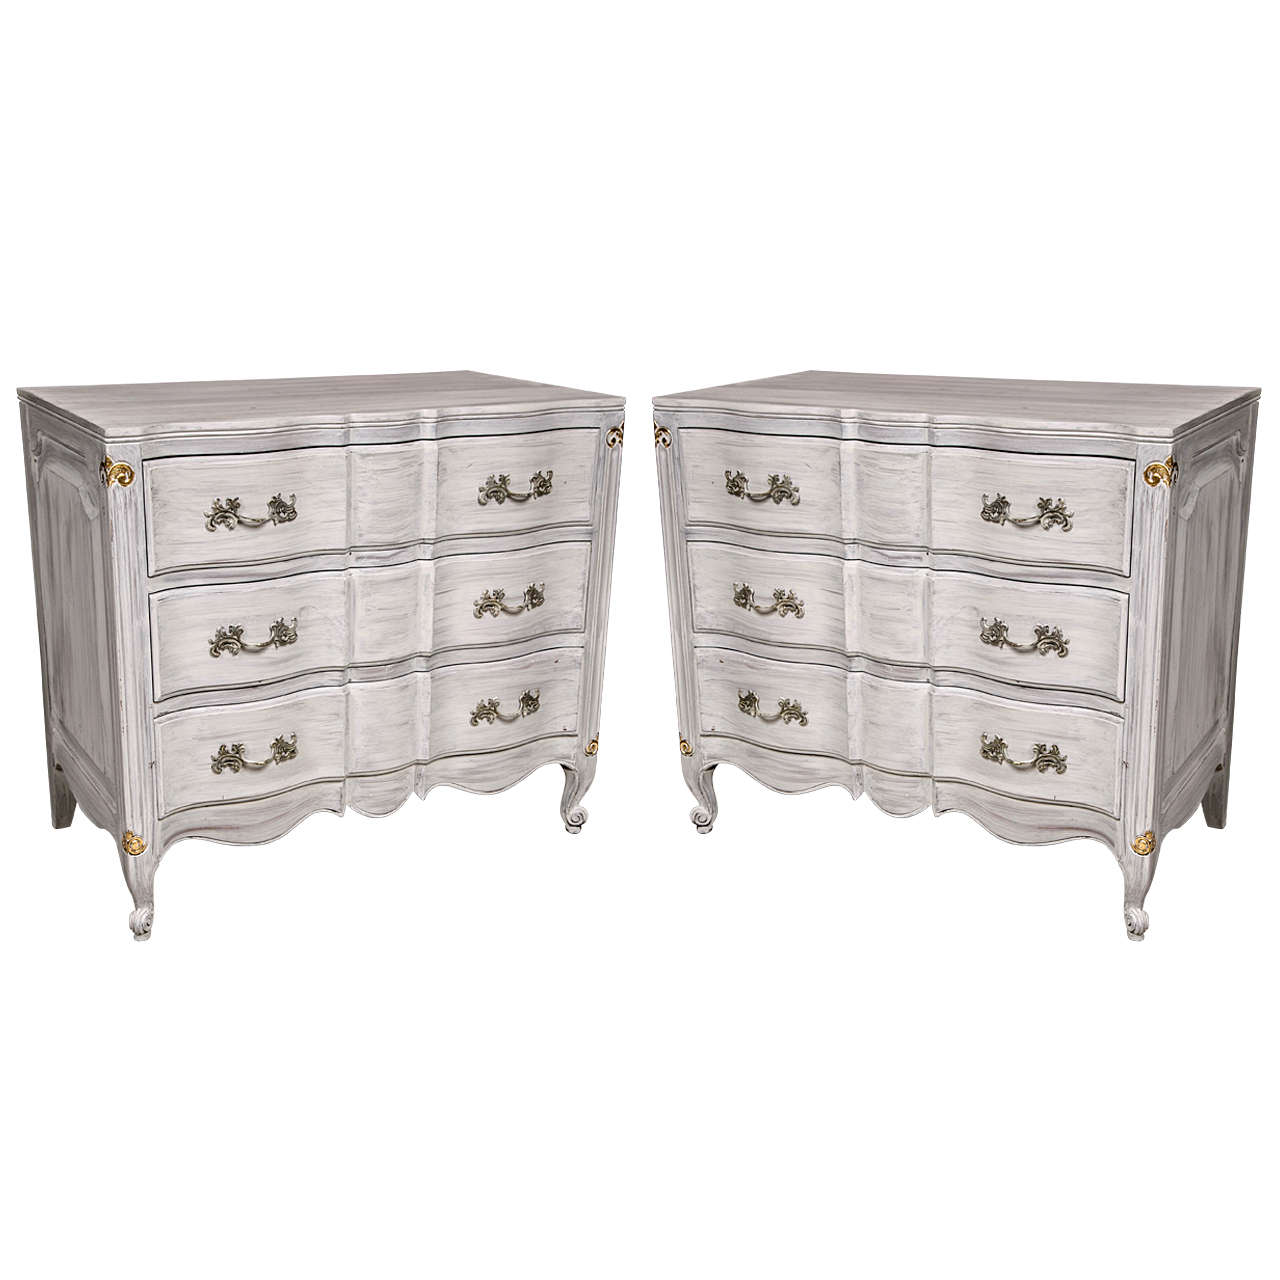 Pair of White Painted Louis XV Style Chests